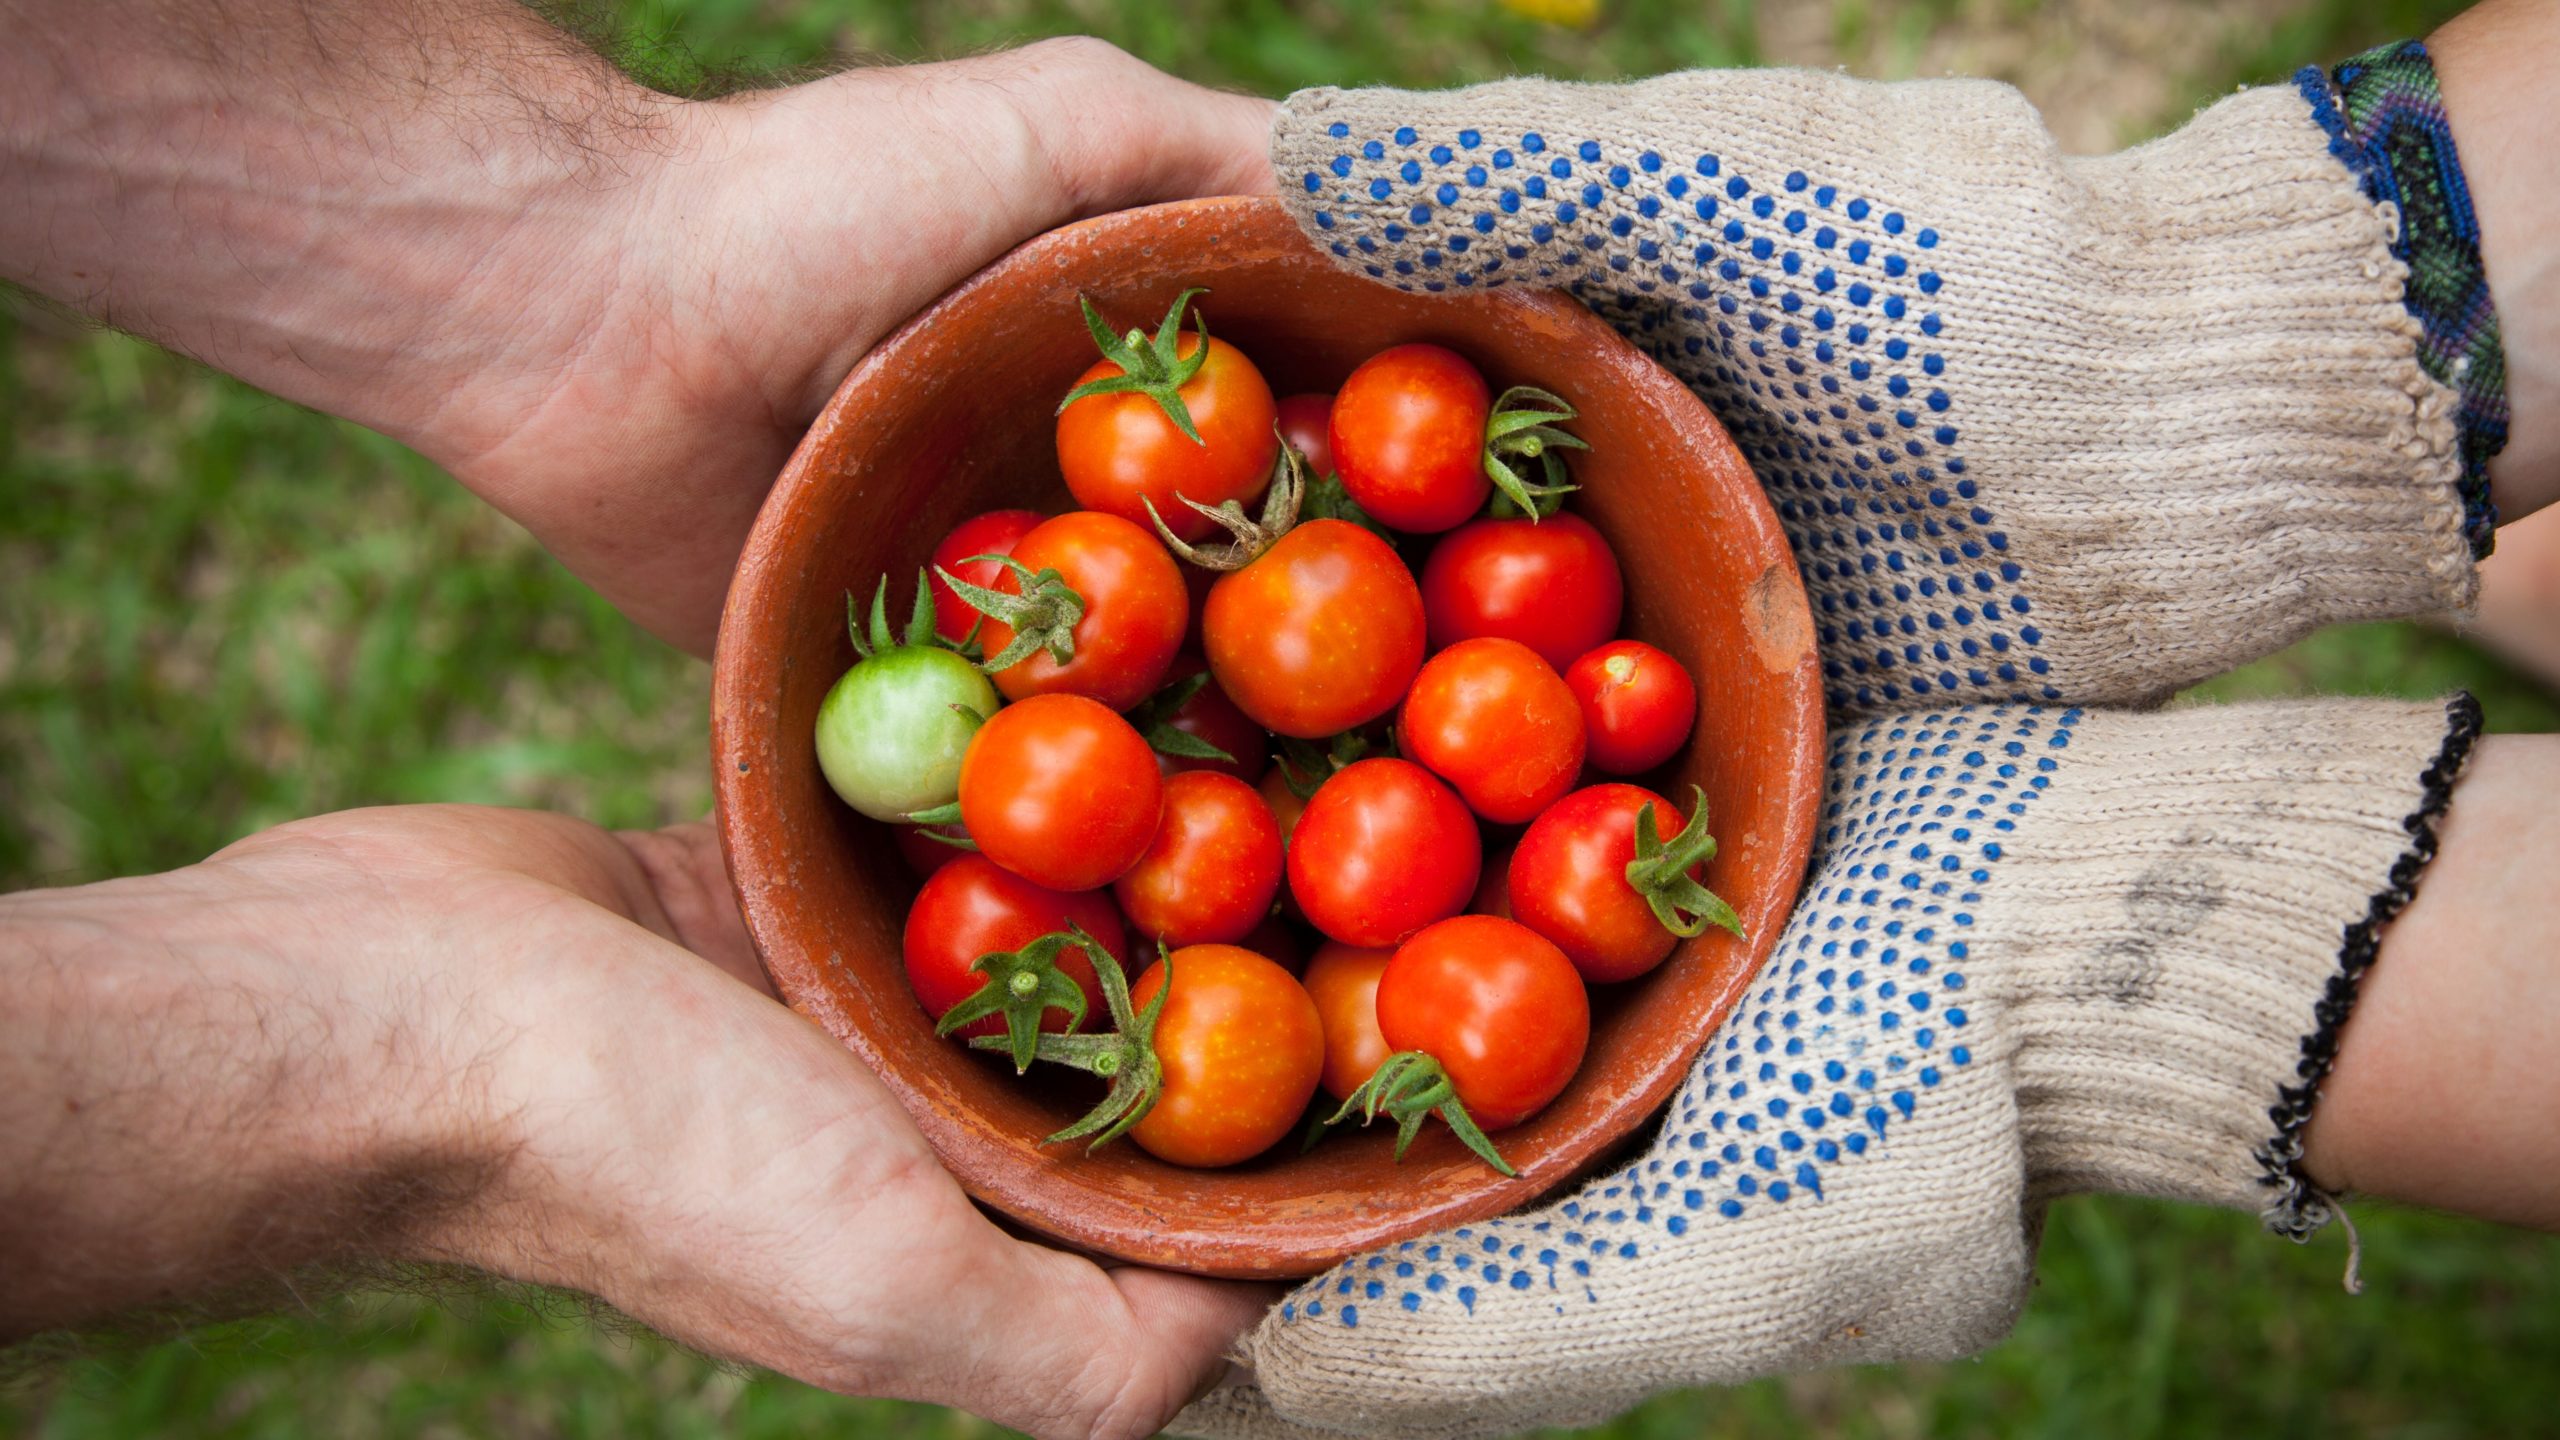 Two pairs of hands (one with gardening gloves) hold a bowl of cherry tomatoes